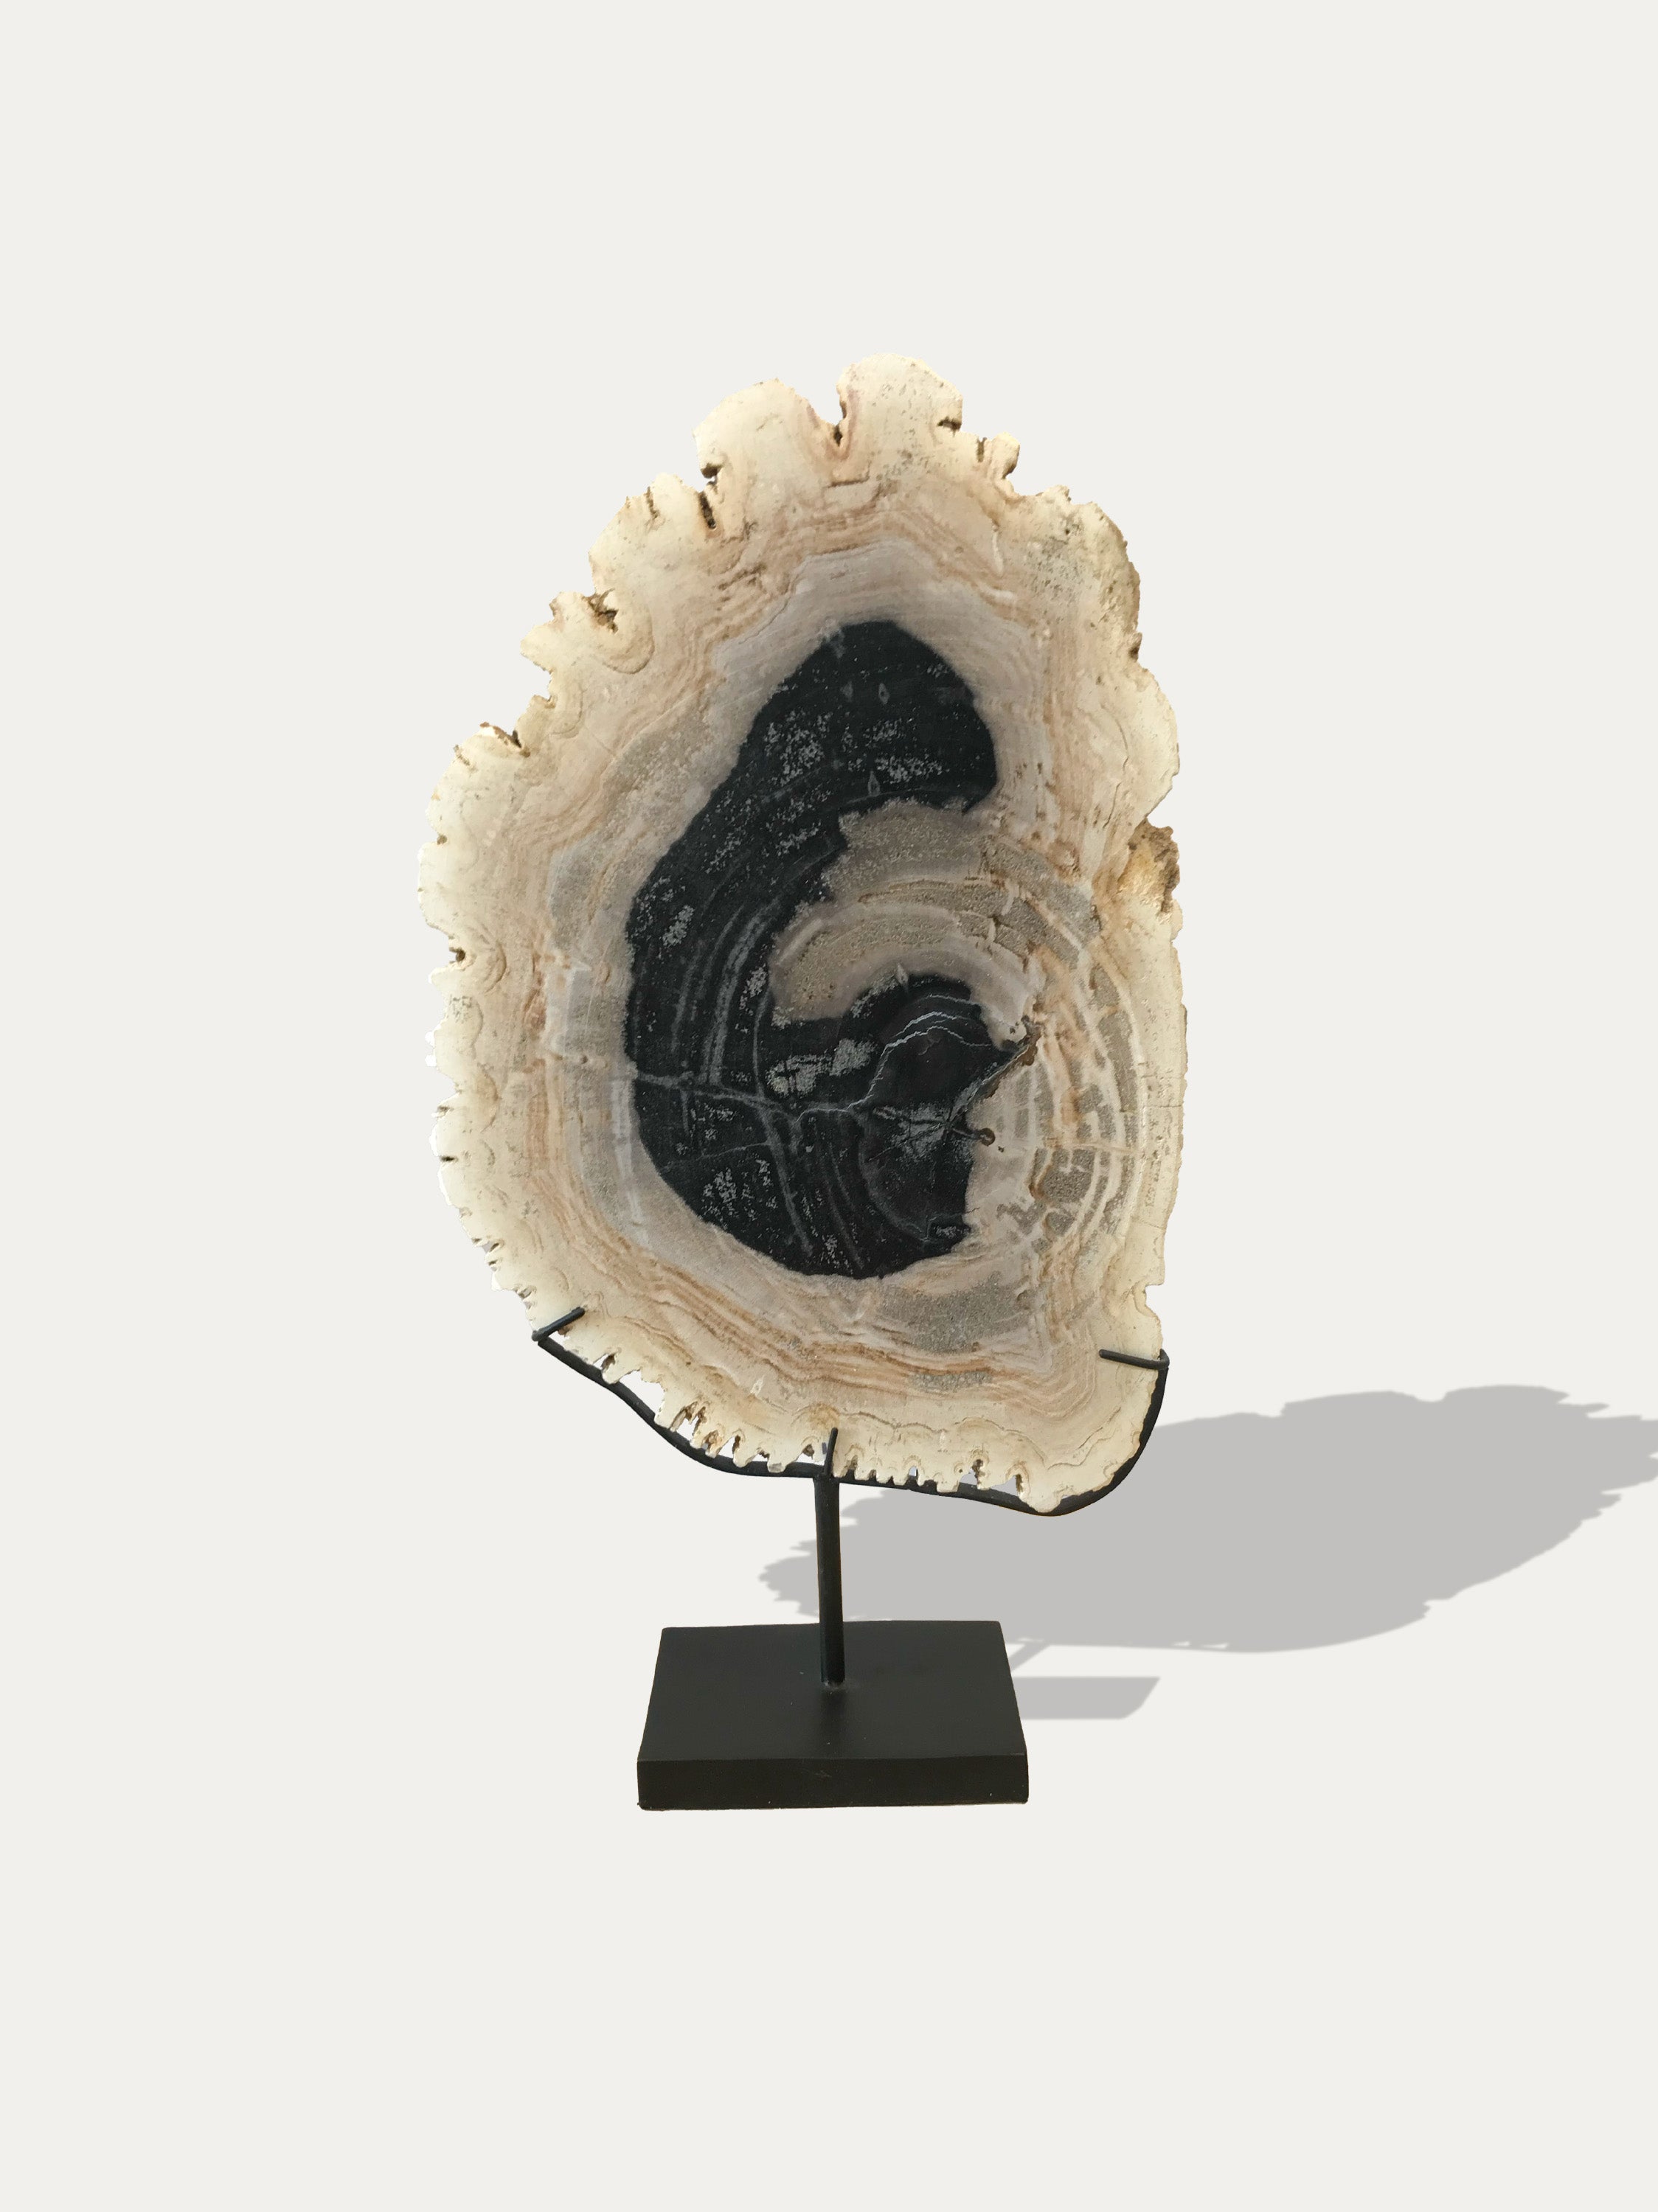 Petrified Wood Sculpture and Tray